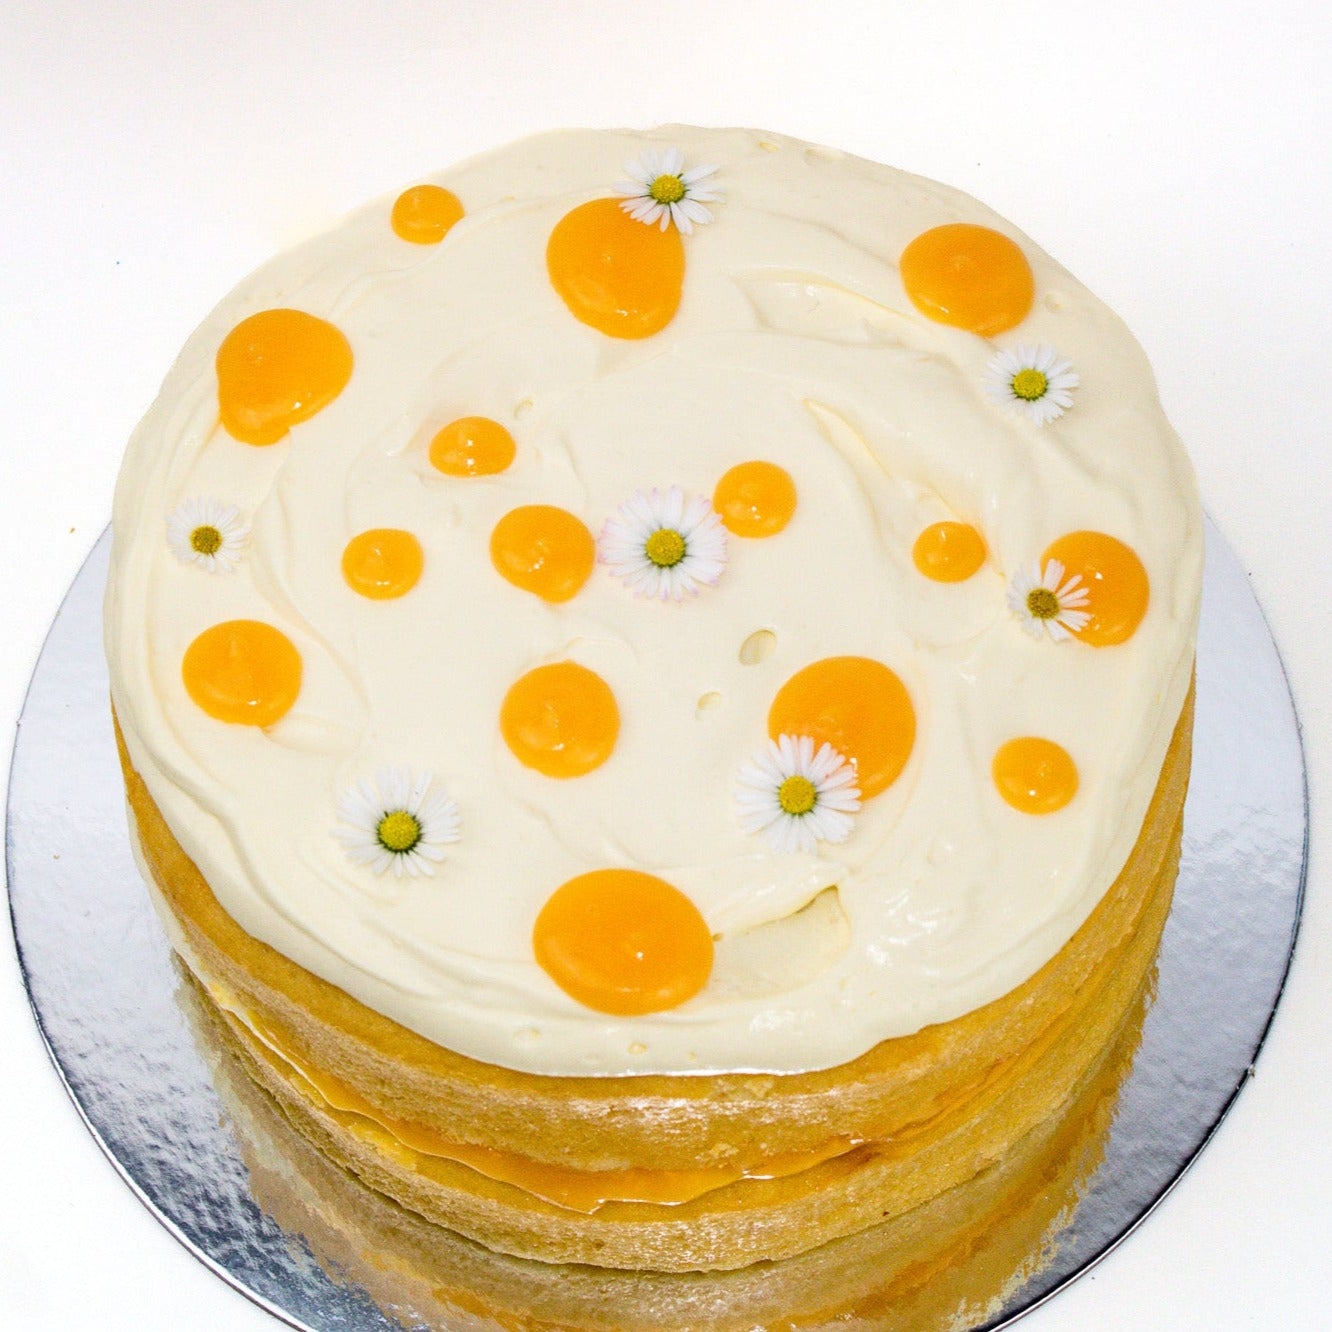 image of the top of the cake. it shows a white icing with yellow lemon curd spots and daisy's